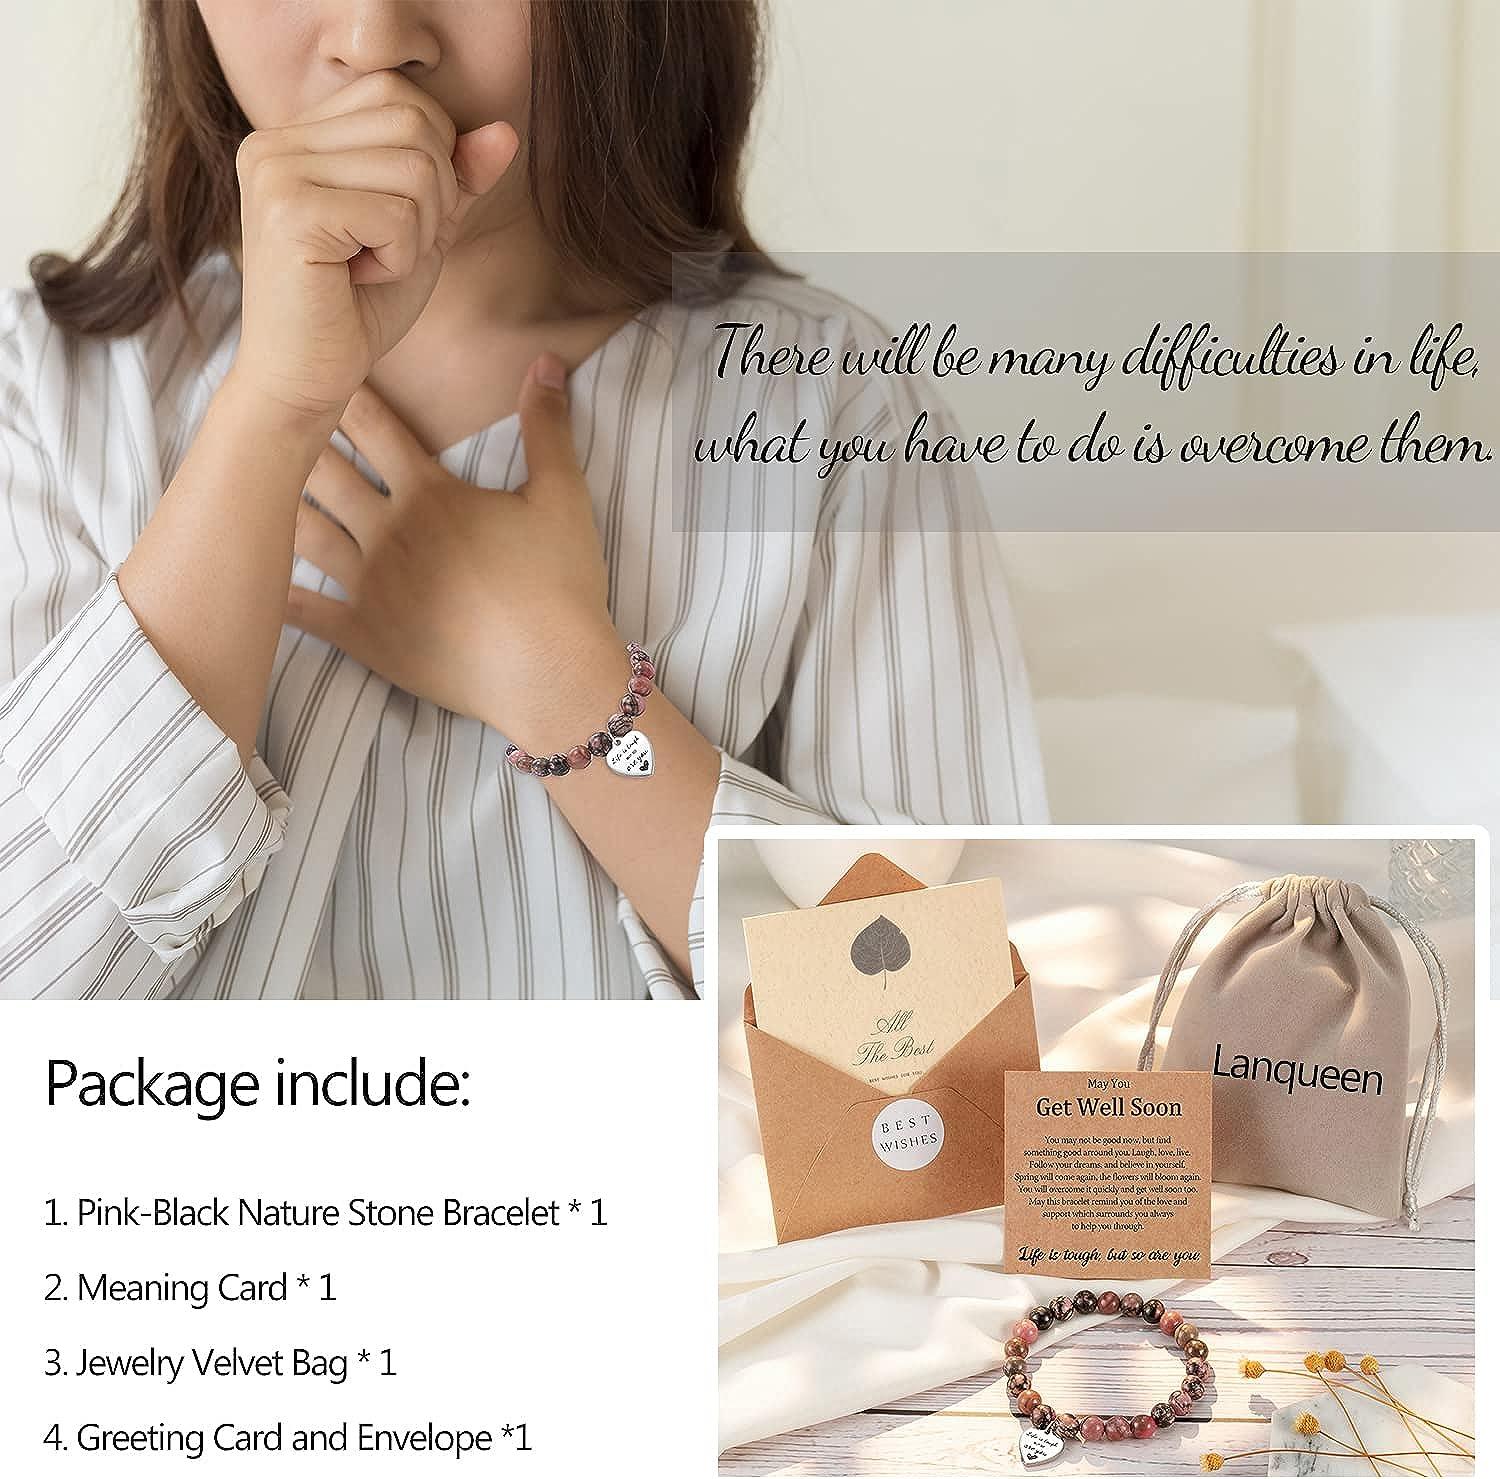 Get Well Soon Bracelet, Get Well Gifts for Women After Surgery